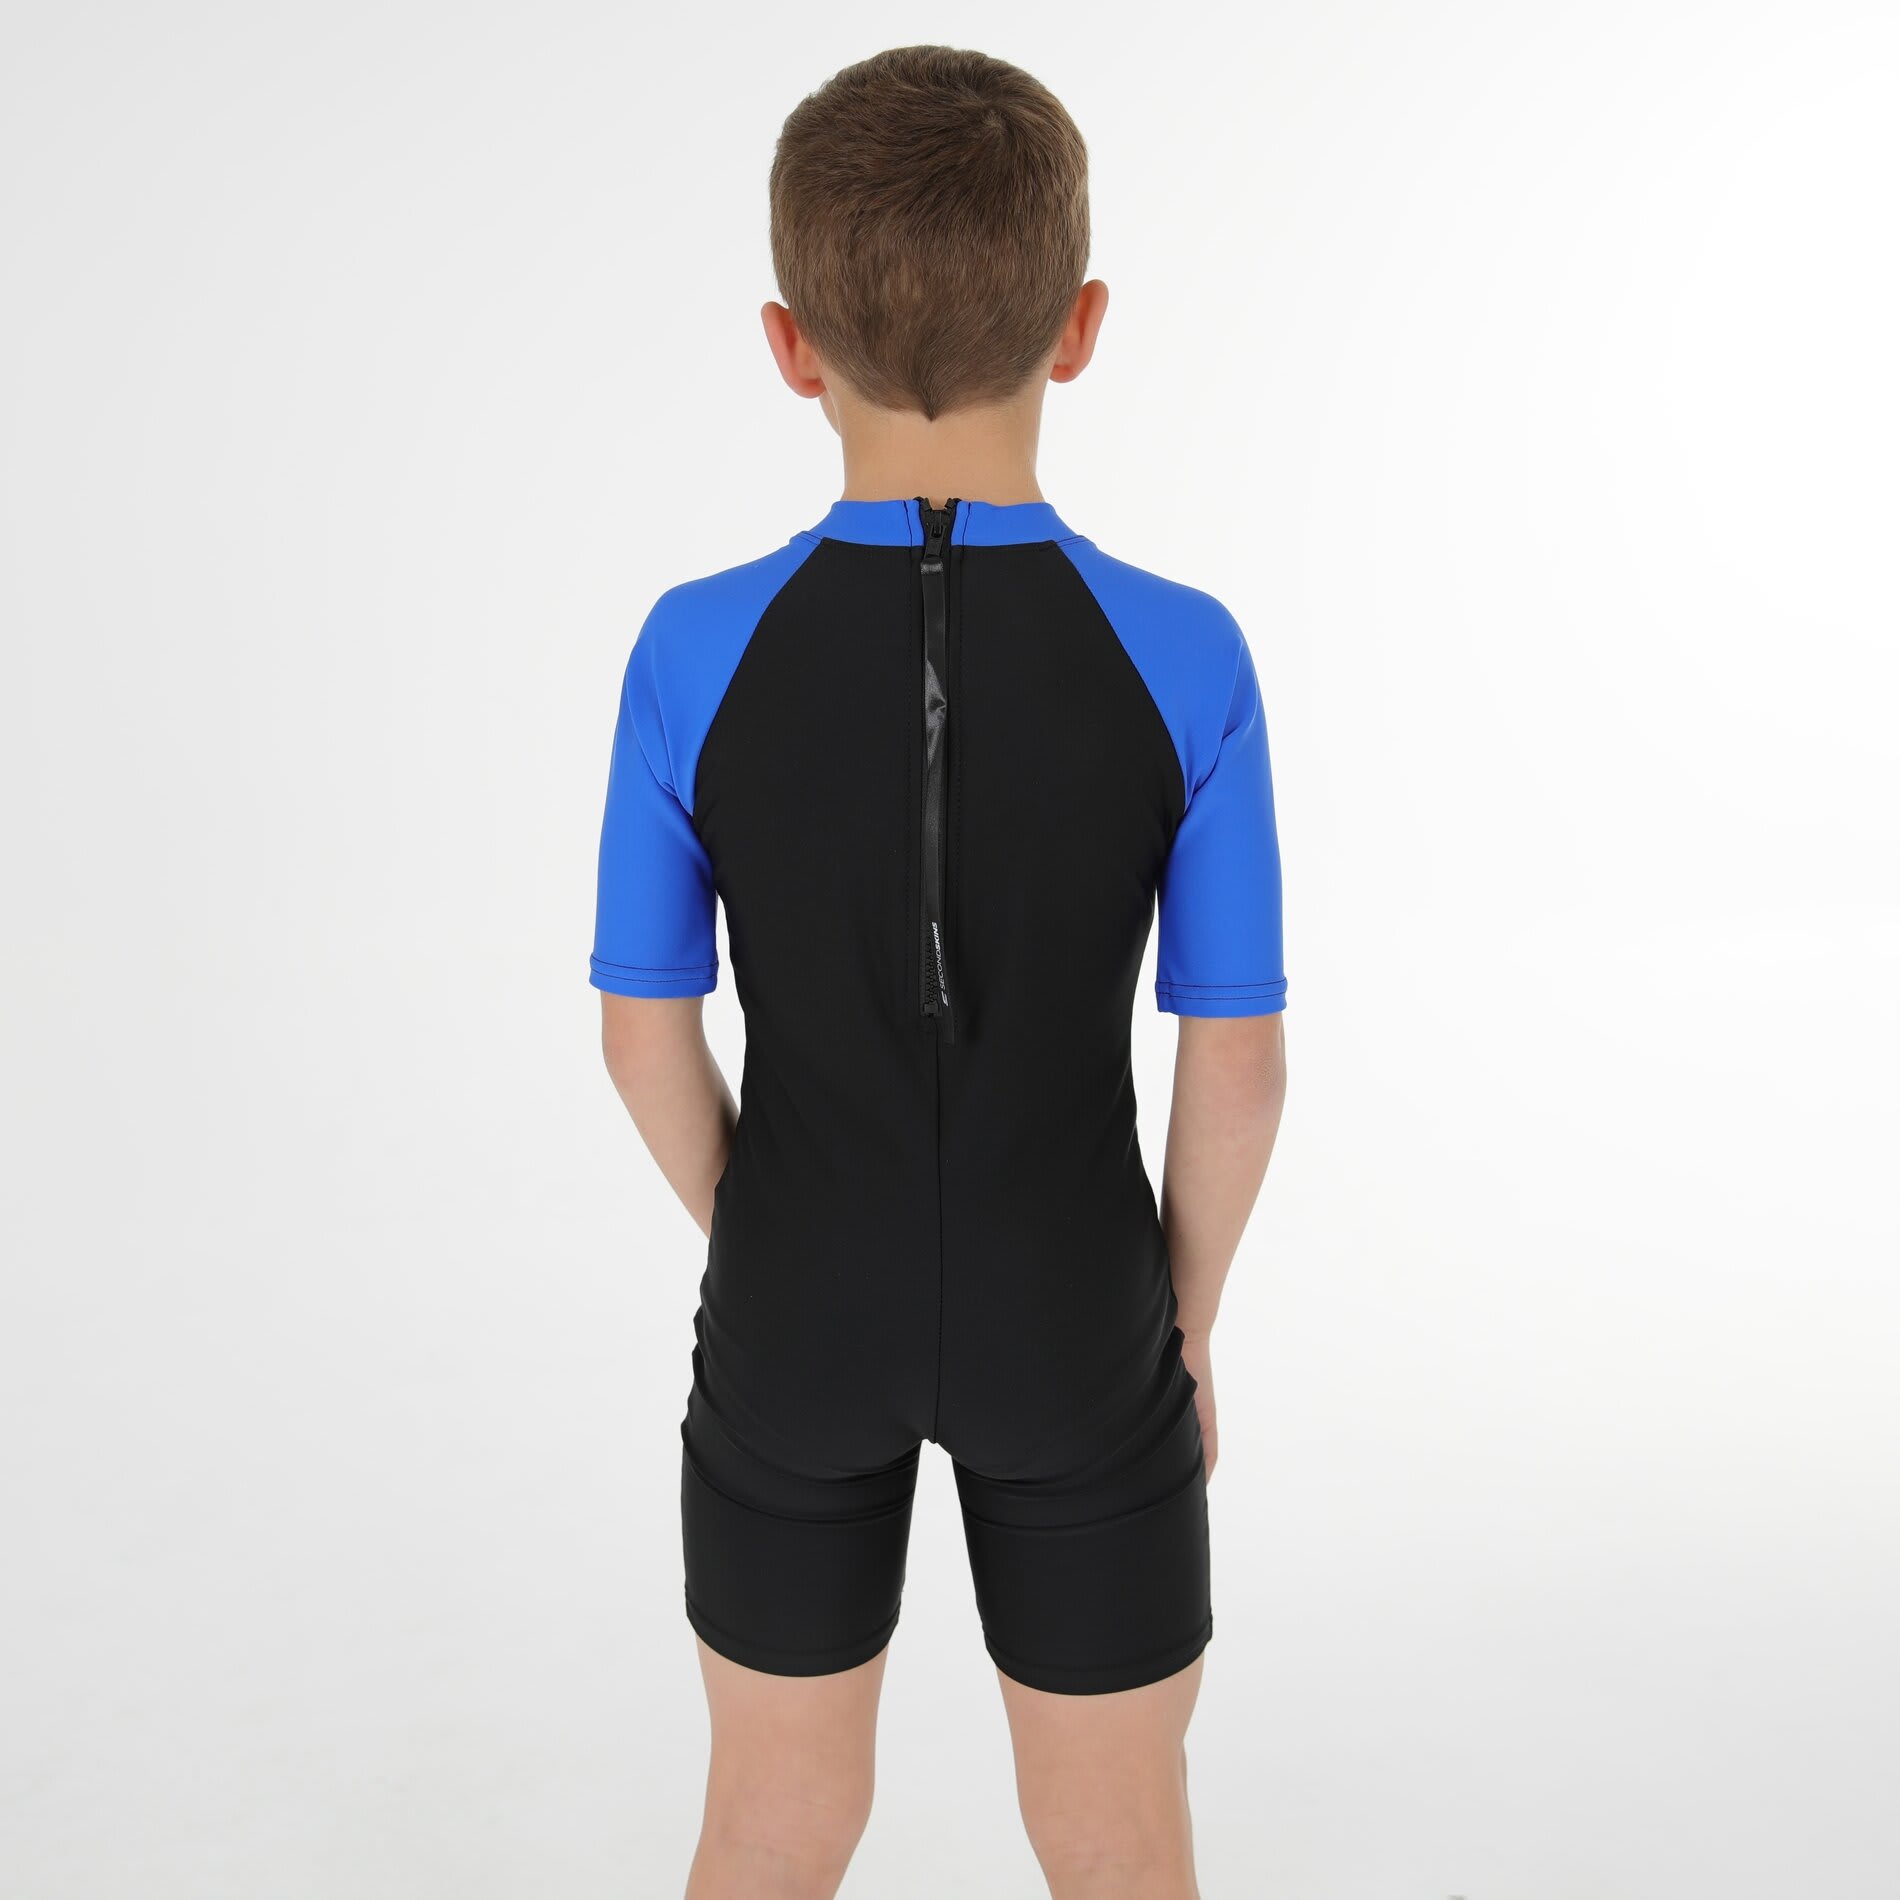 Second Skins Boys Waves Short Sleeve Sunsuit | by Second Skins | Price ...